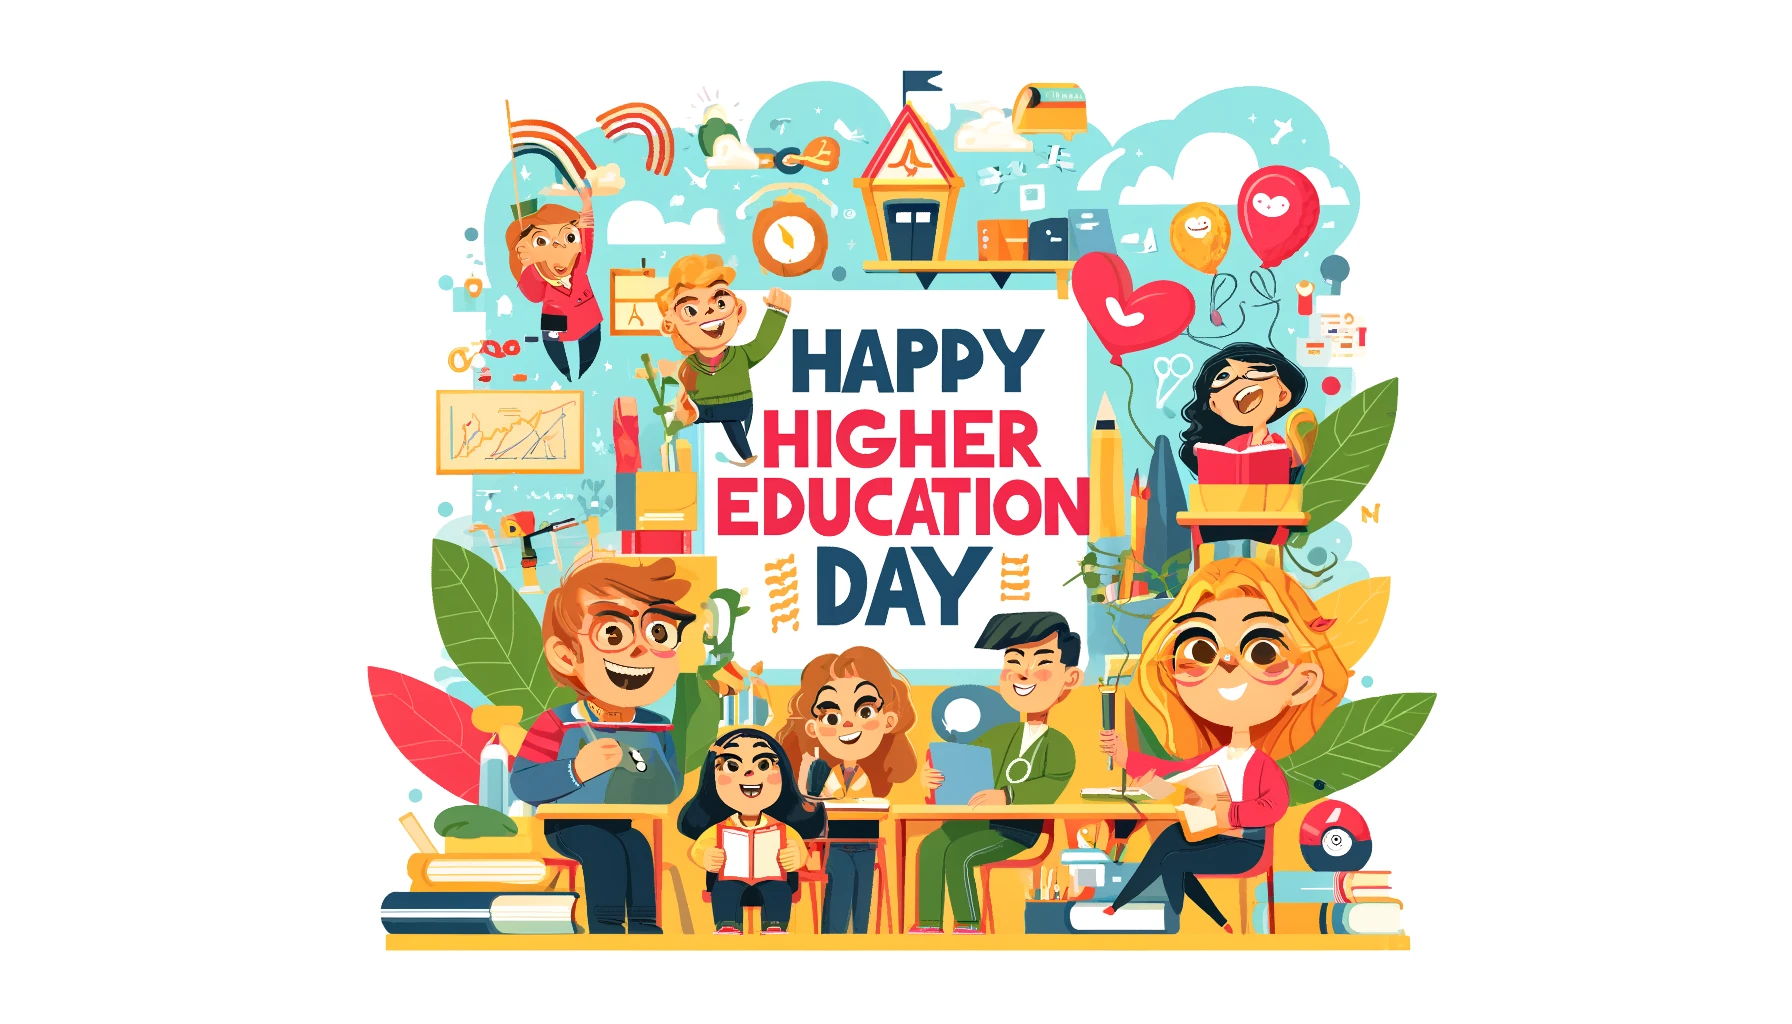 Celebrate National Higher Education Day with Uplifting Messages